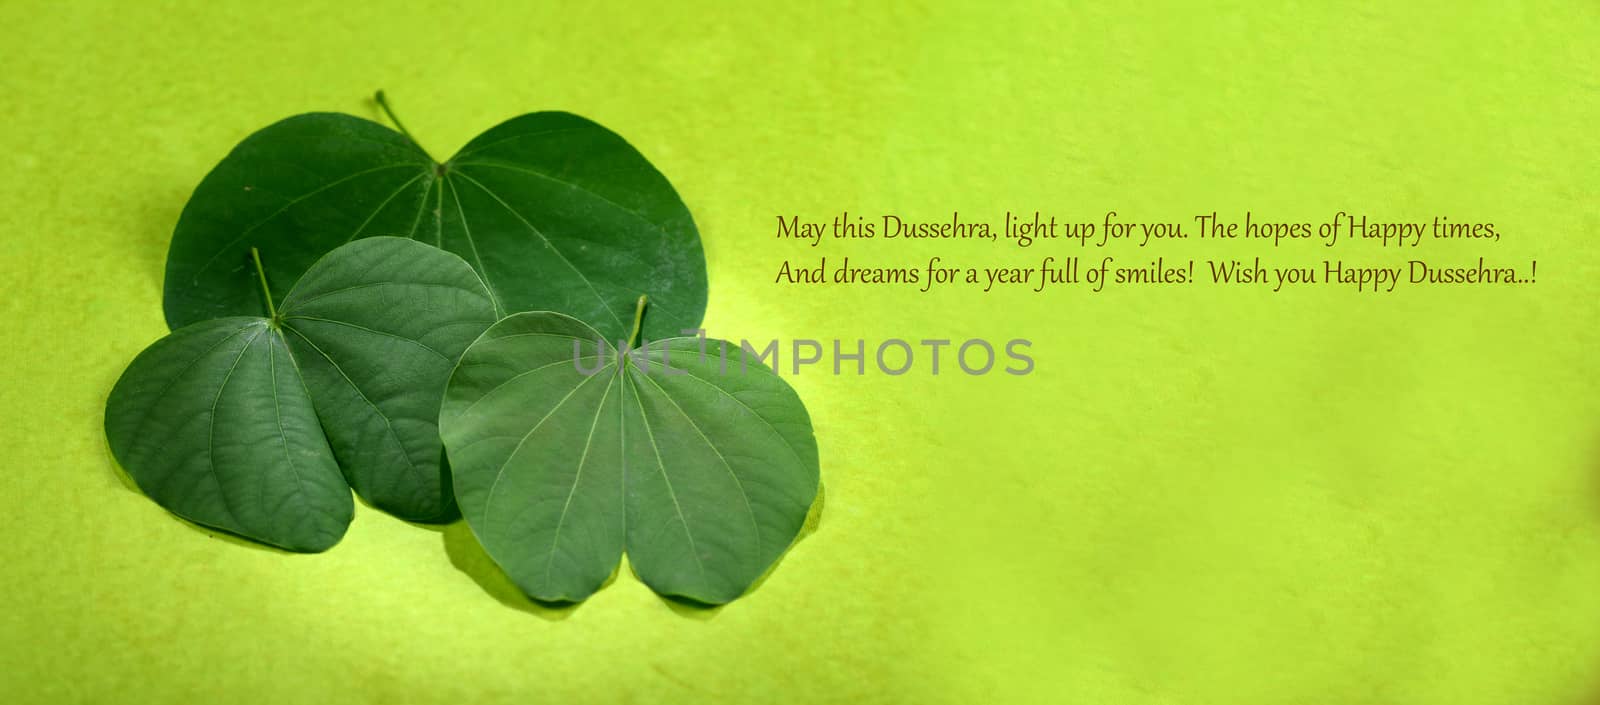 Indian Festival Dussehra, showing golden leaf and flowers on green background. Greeting card.